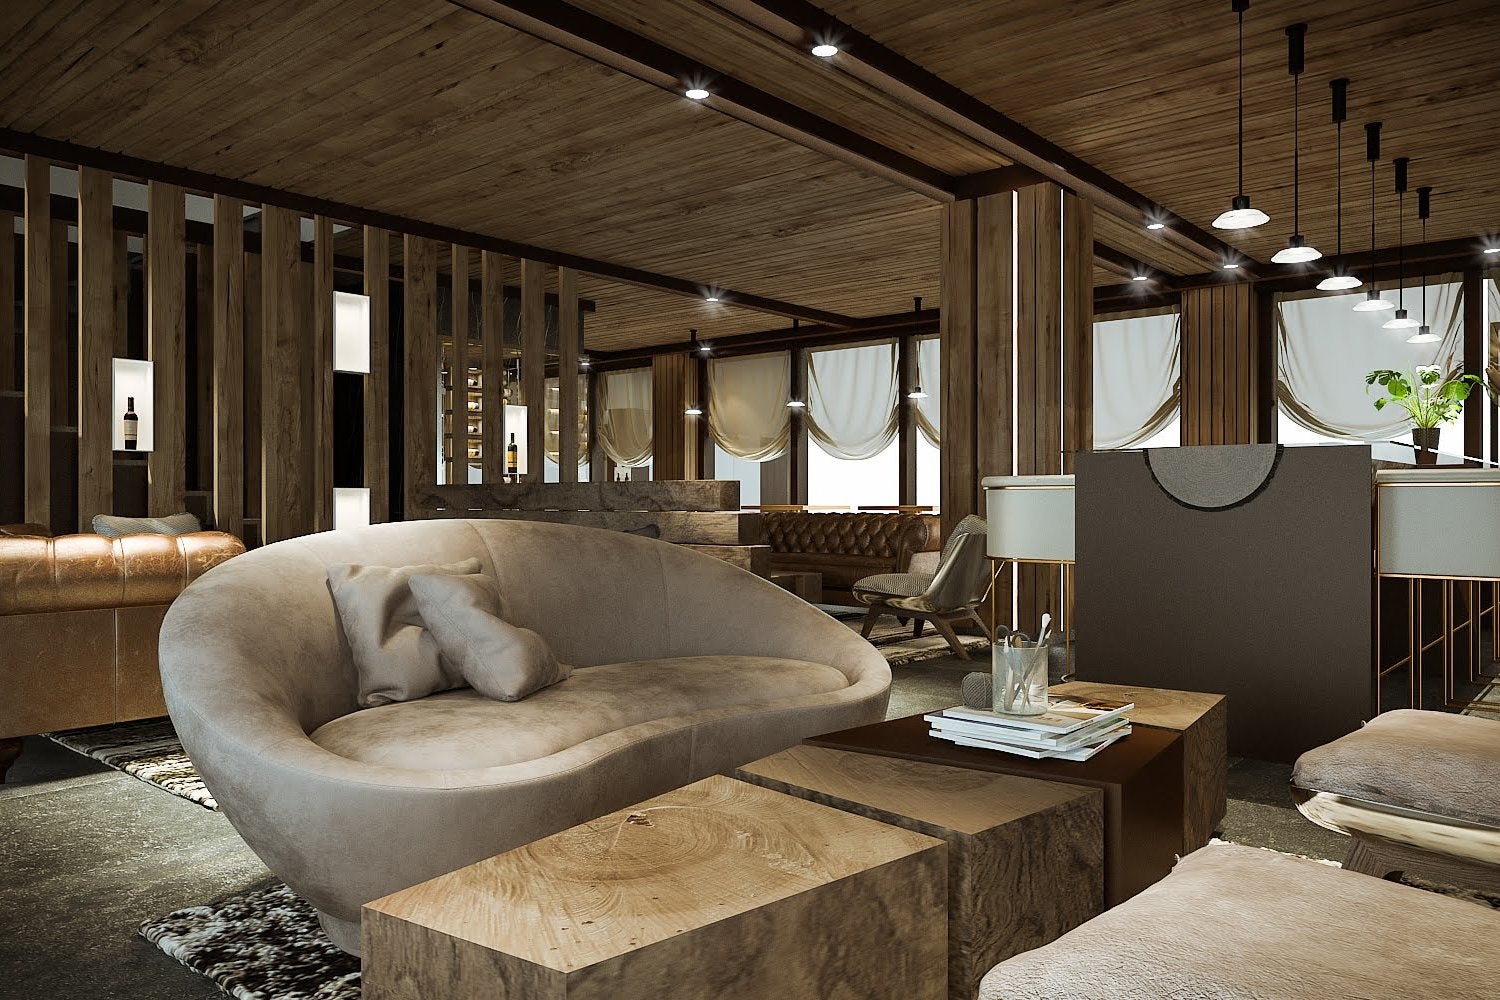 Le Massif is Courmayeur’s latest opening